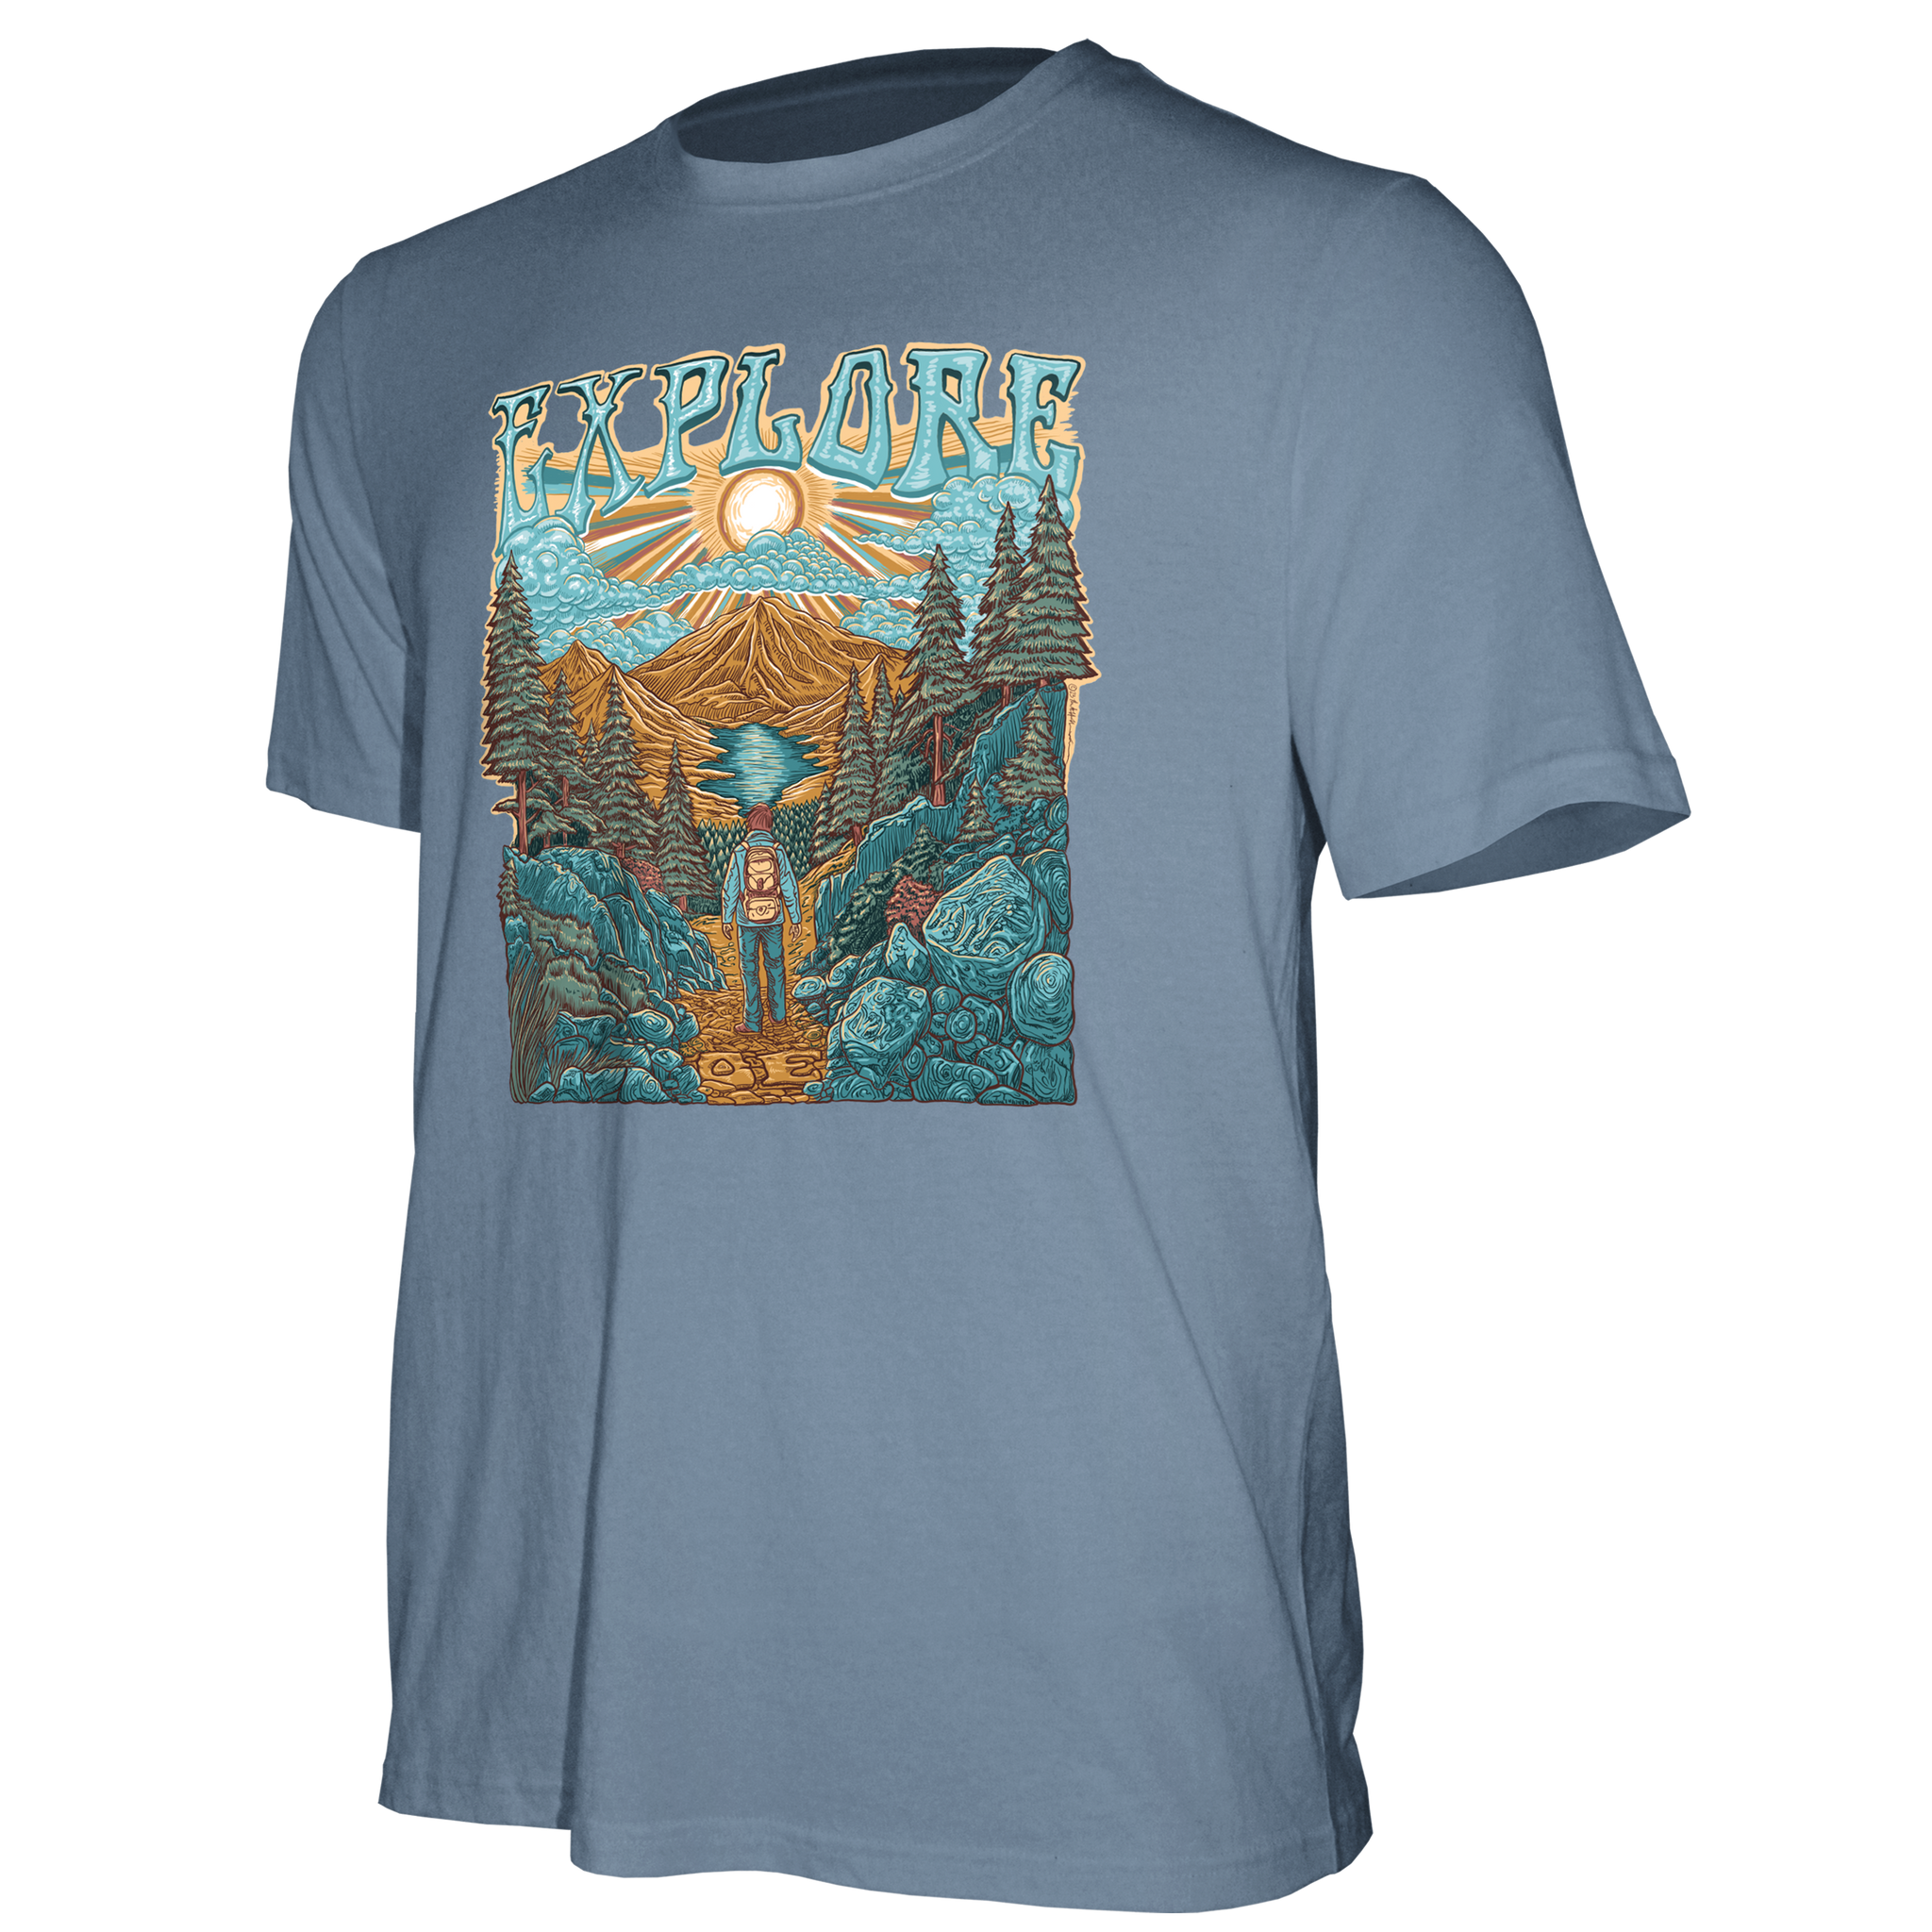 Outdoor Endeavors Out There- American Made Tee - EXPLORE FRONT